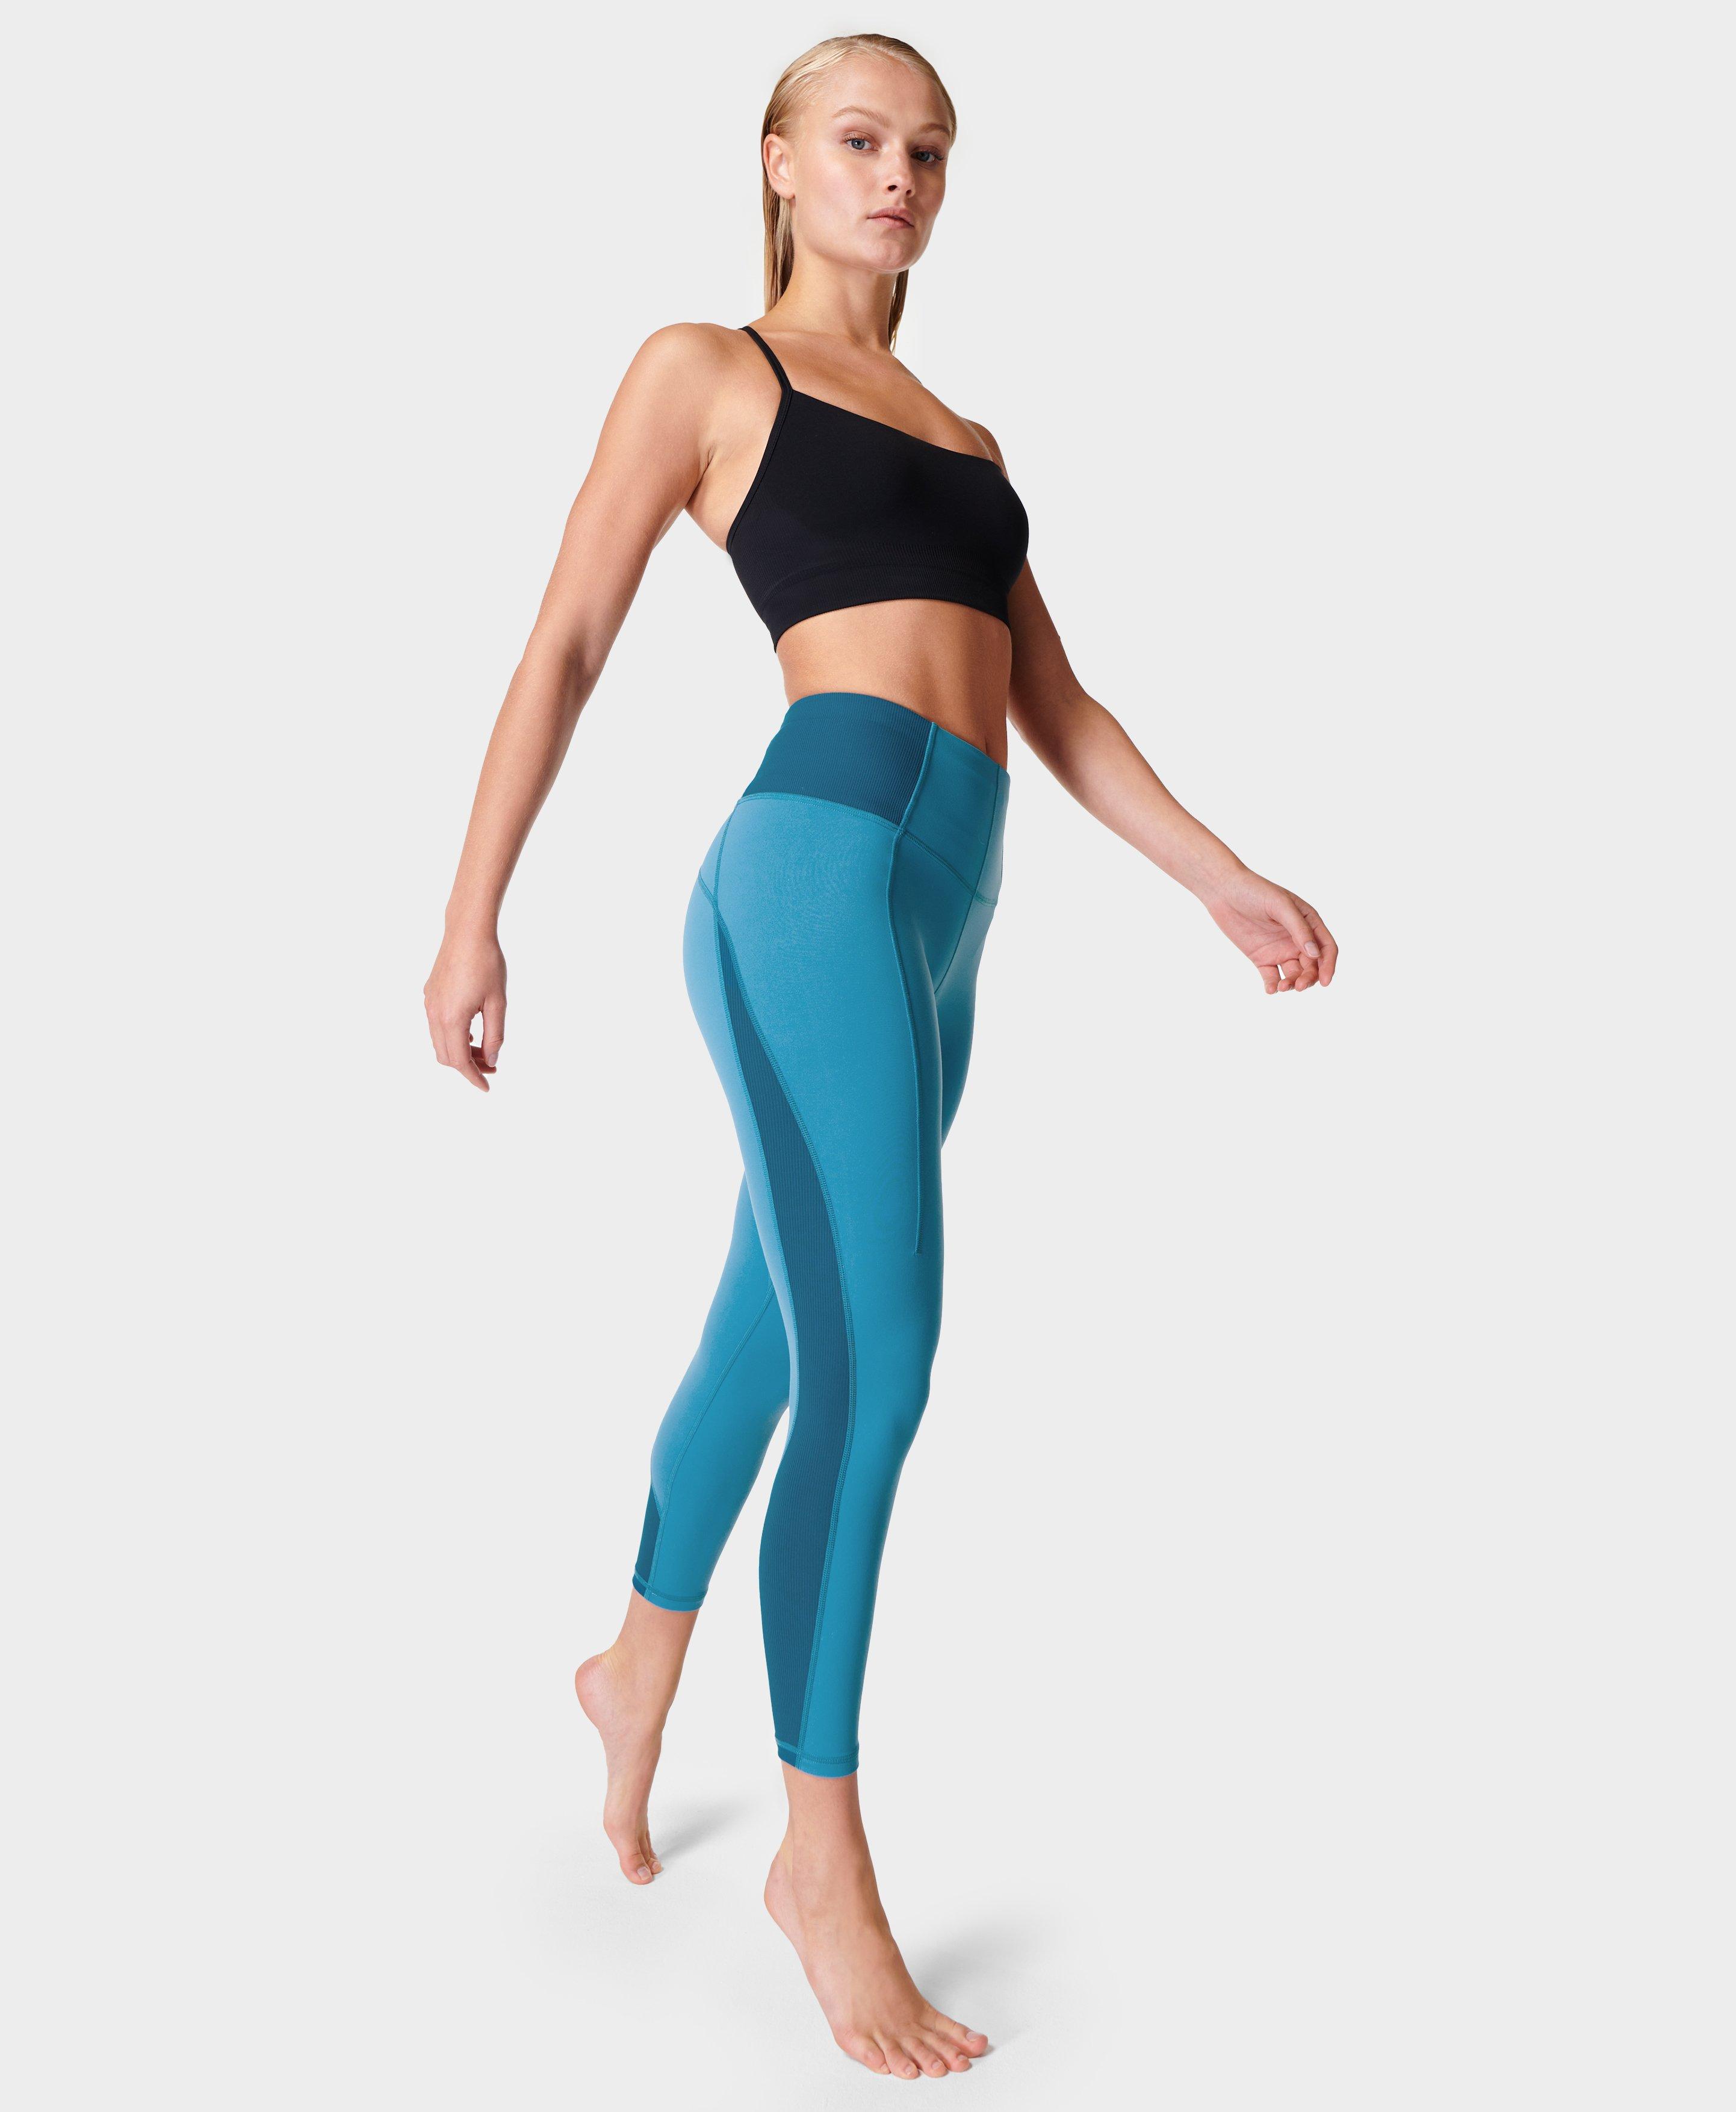 Sweaty Betty sale: Up to 50% off leggings, backpacks and more